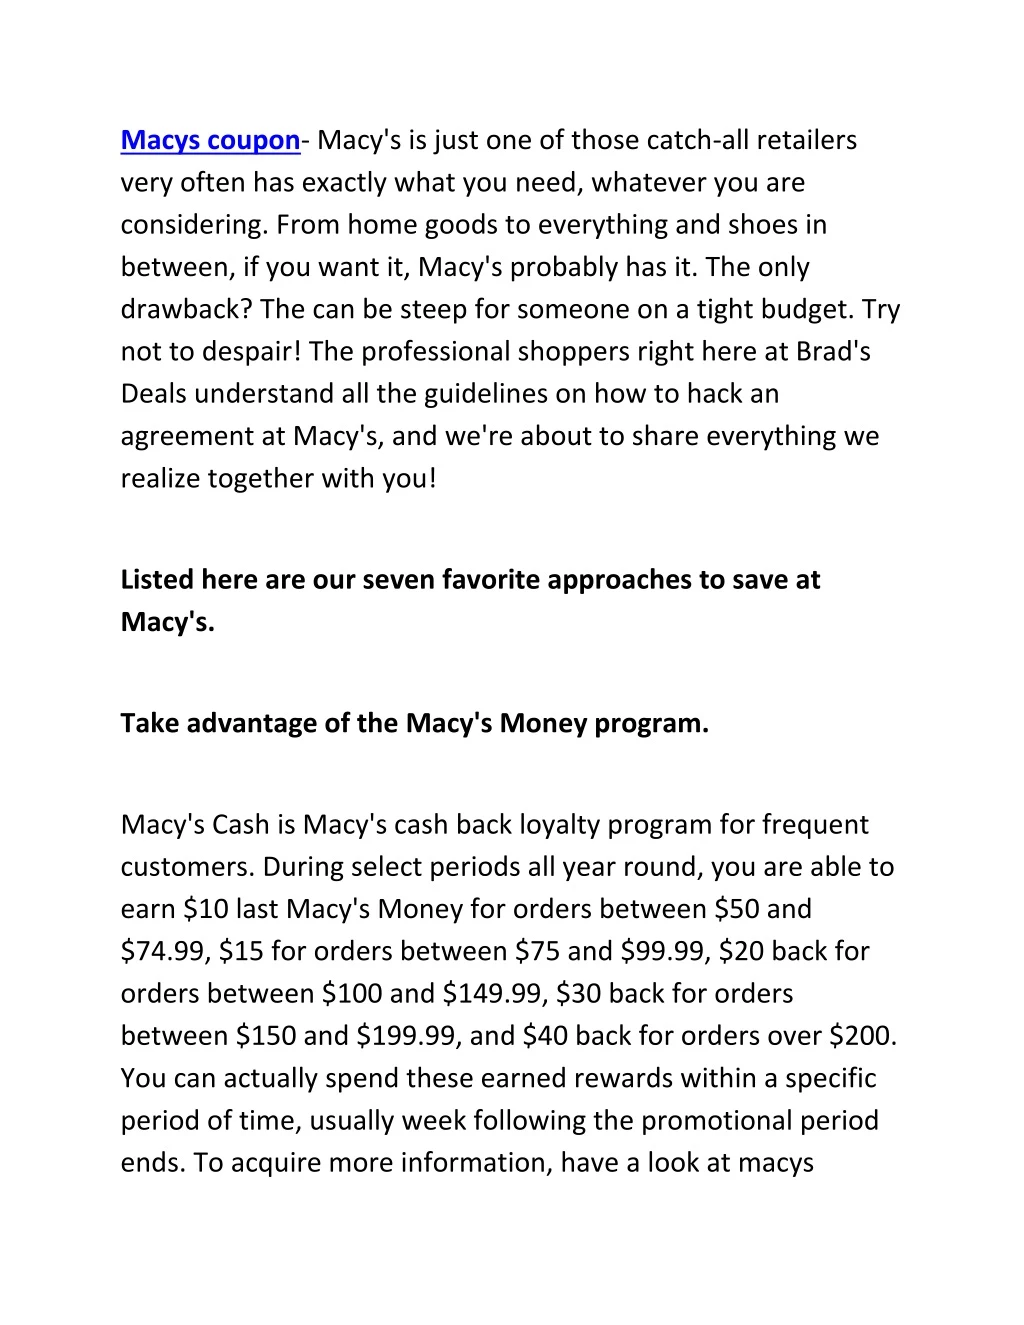 macys coupon macy s is just one of those catch